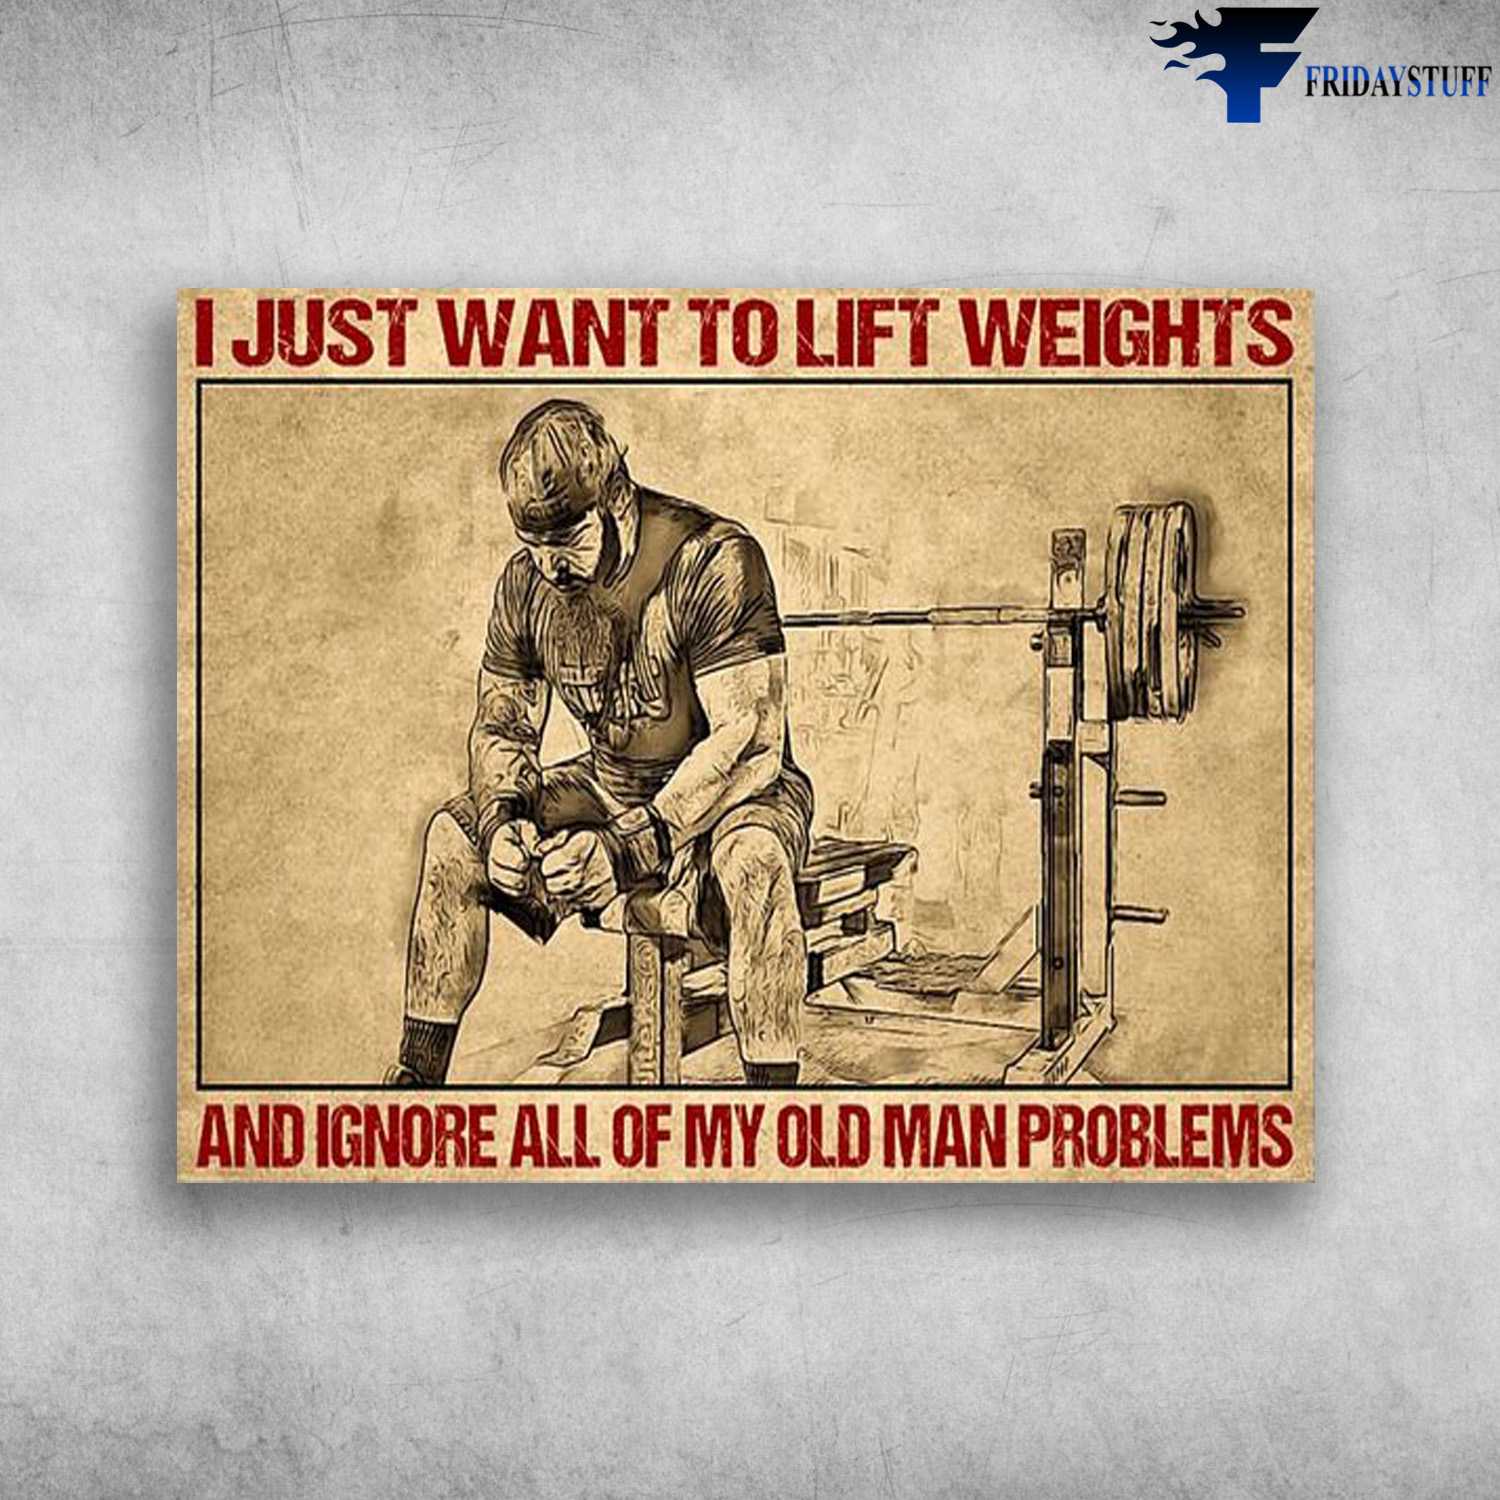 Gym Room, Gym Poster, Weightlifting Man, I Just Want To Lift Weights, And Ignore All Of My Old Man Problems